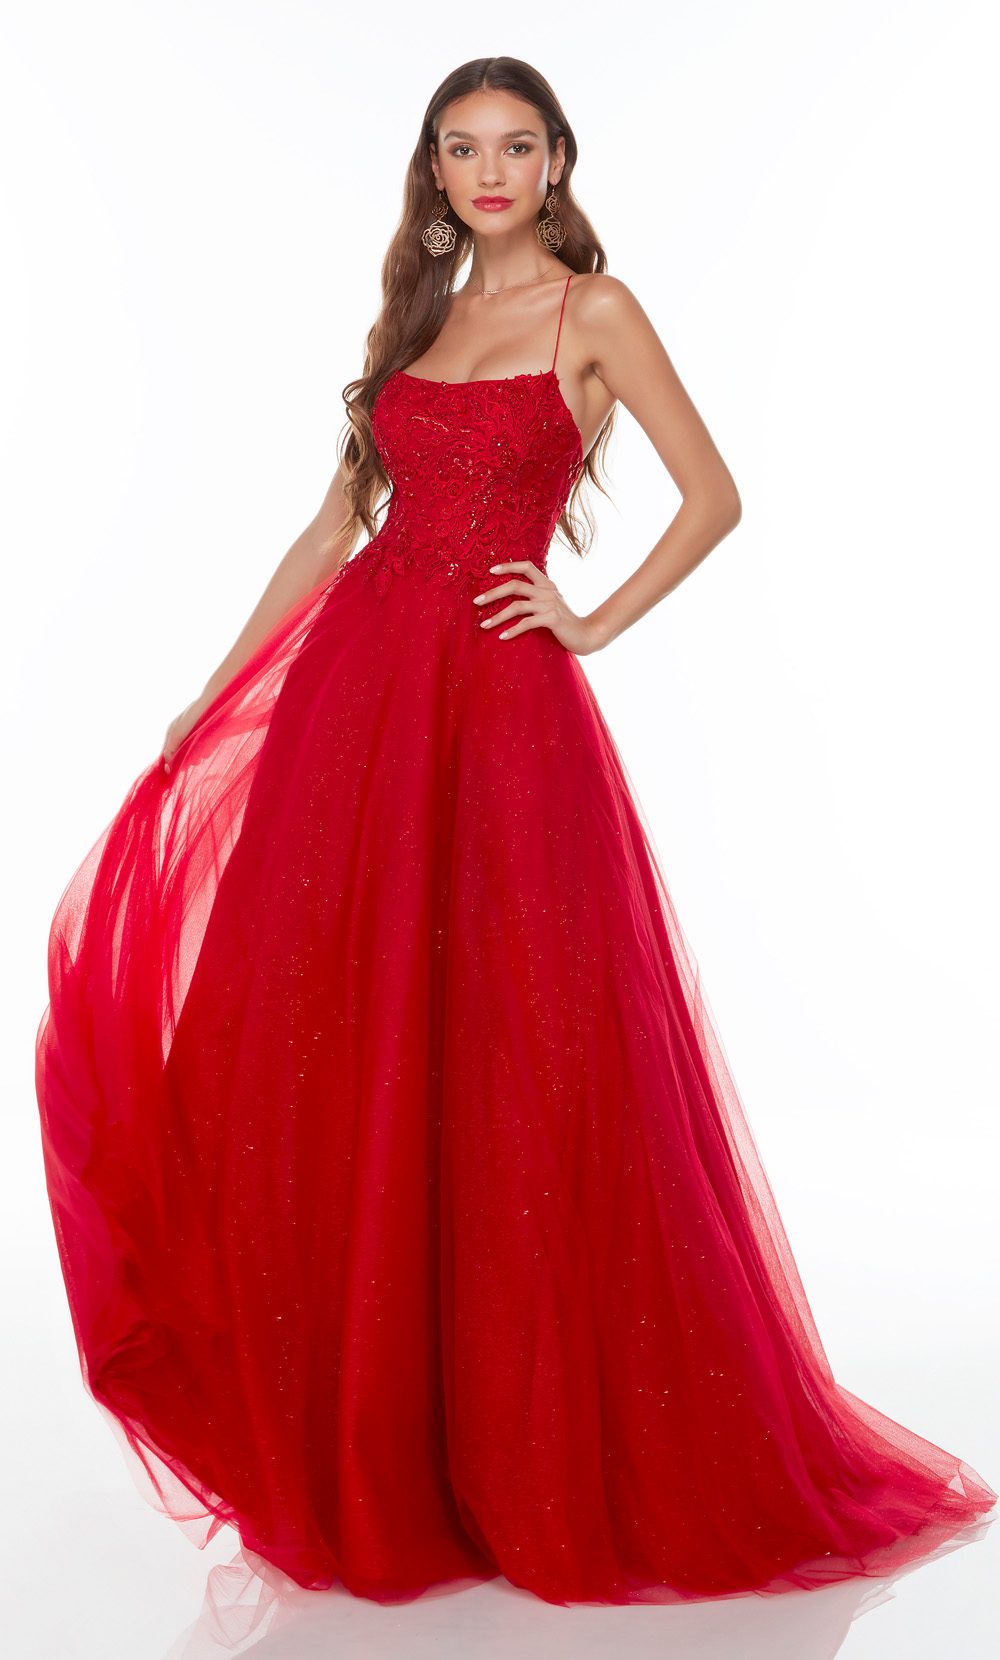 A red gown